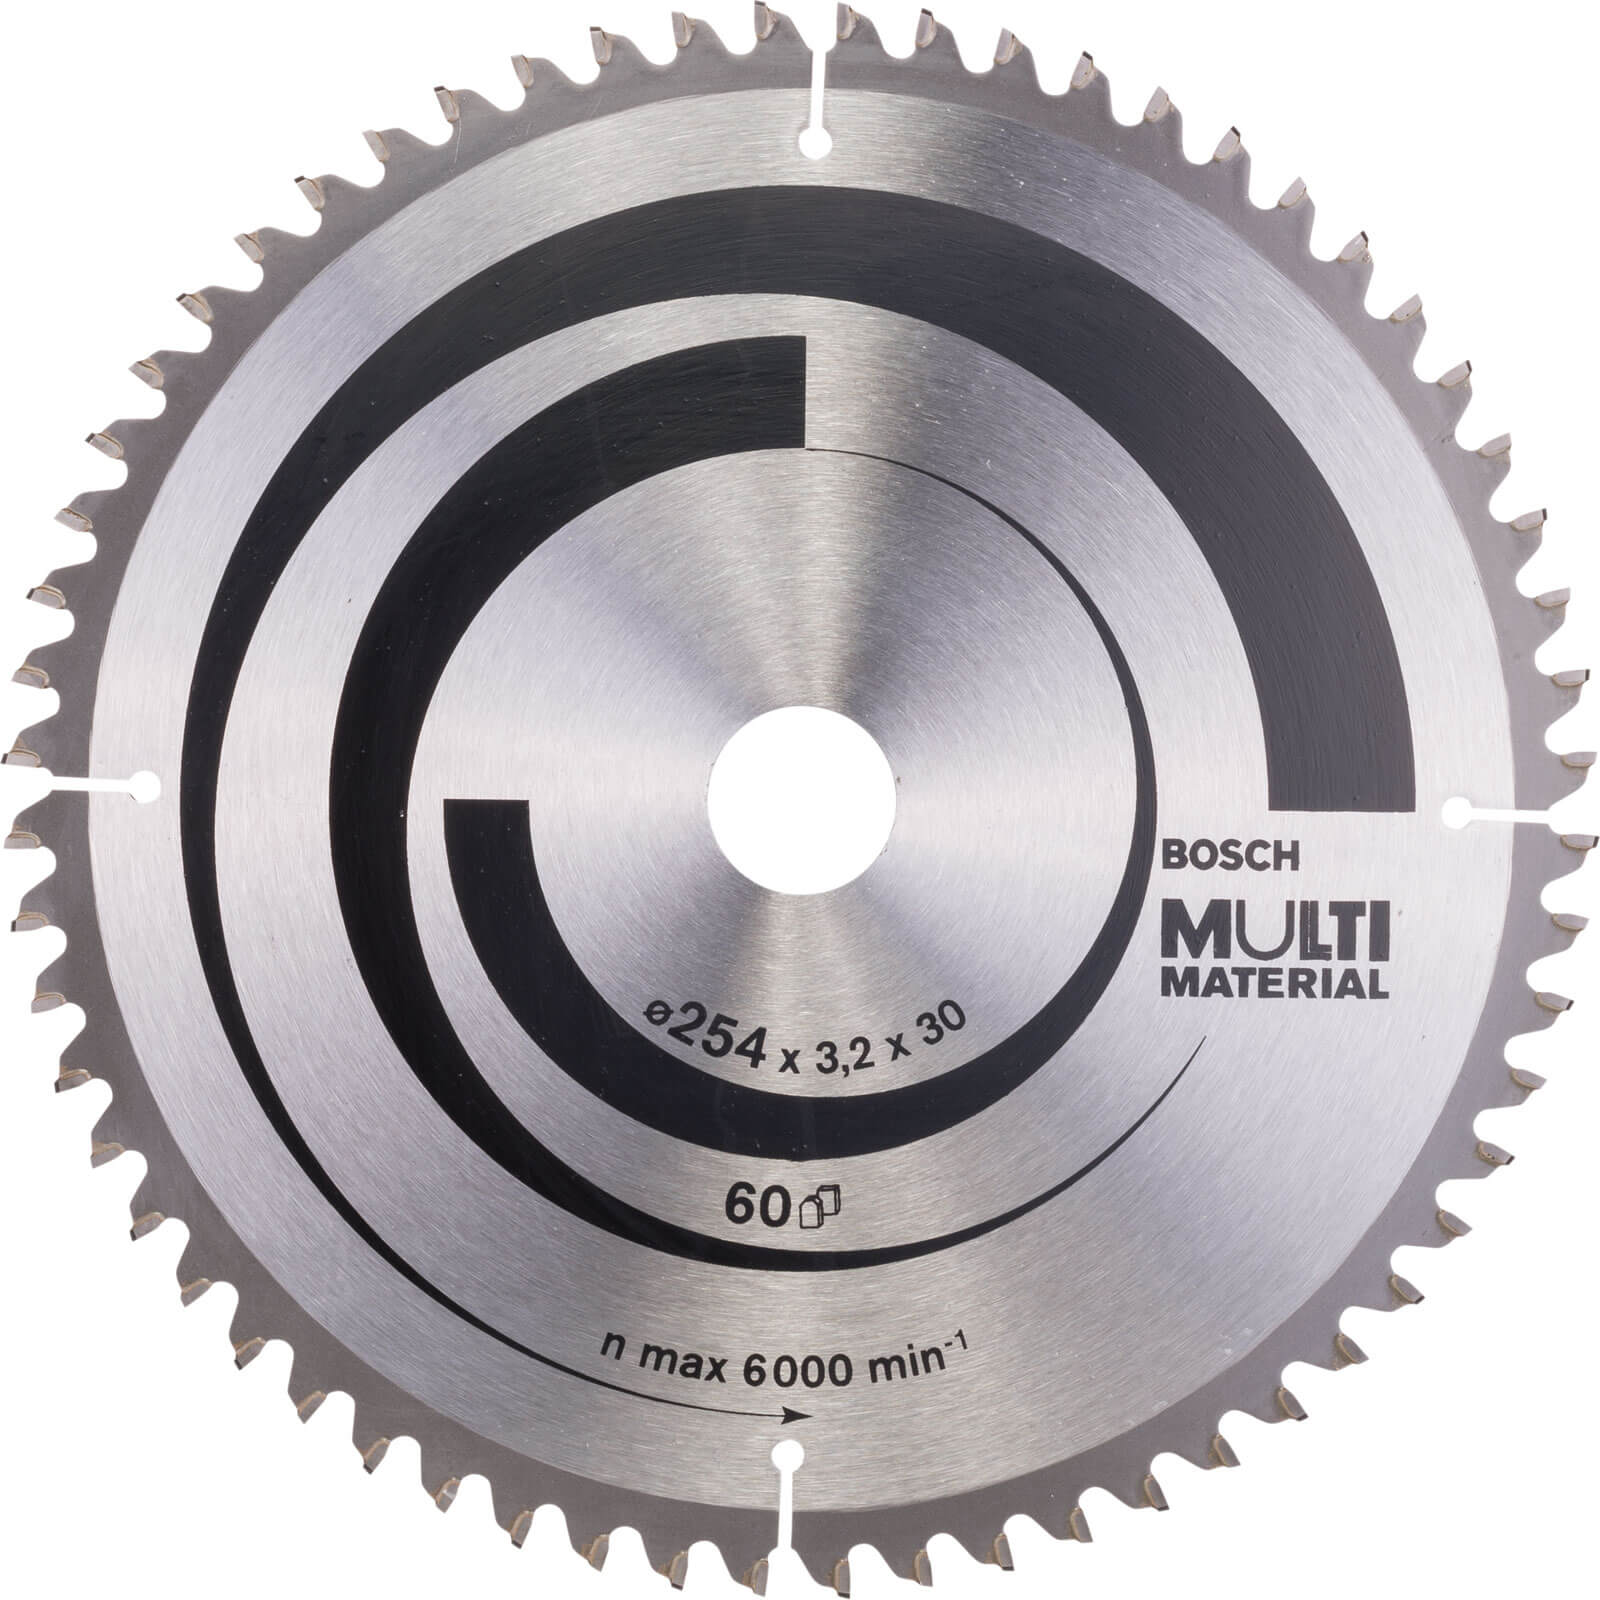 Photos - Power Tool Accessory Bosch Multi Material Cutting Mitre and Table Saw Blade 254mm 60T 30mm 